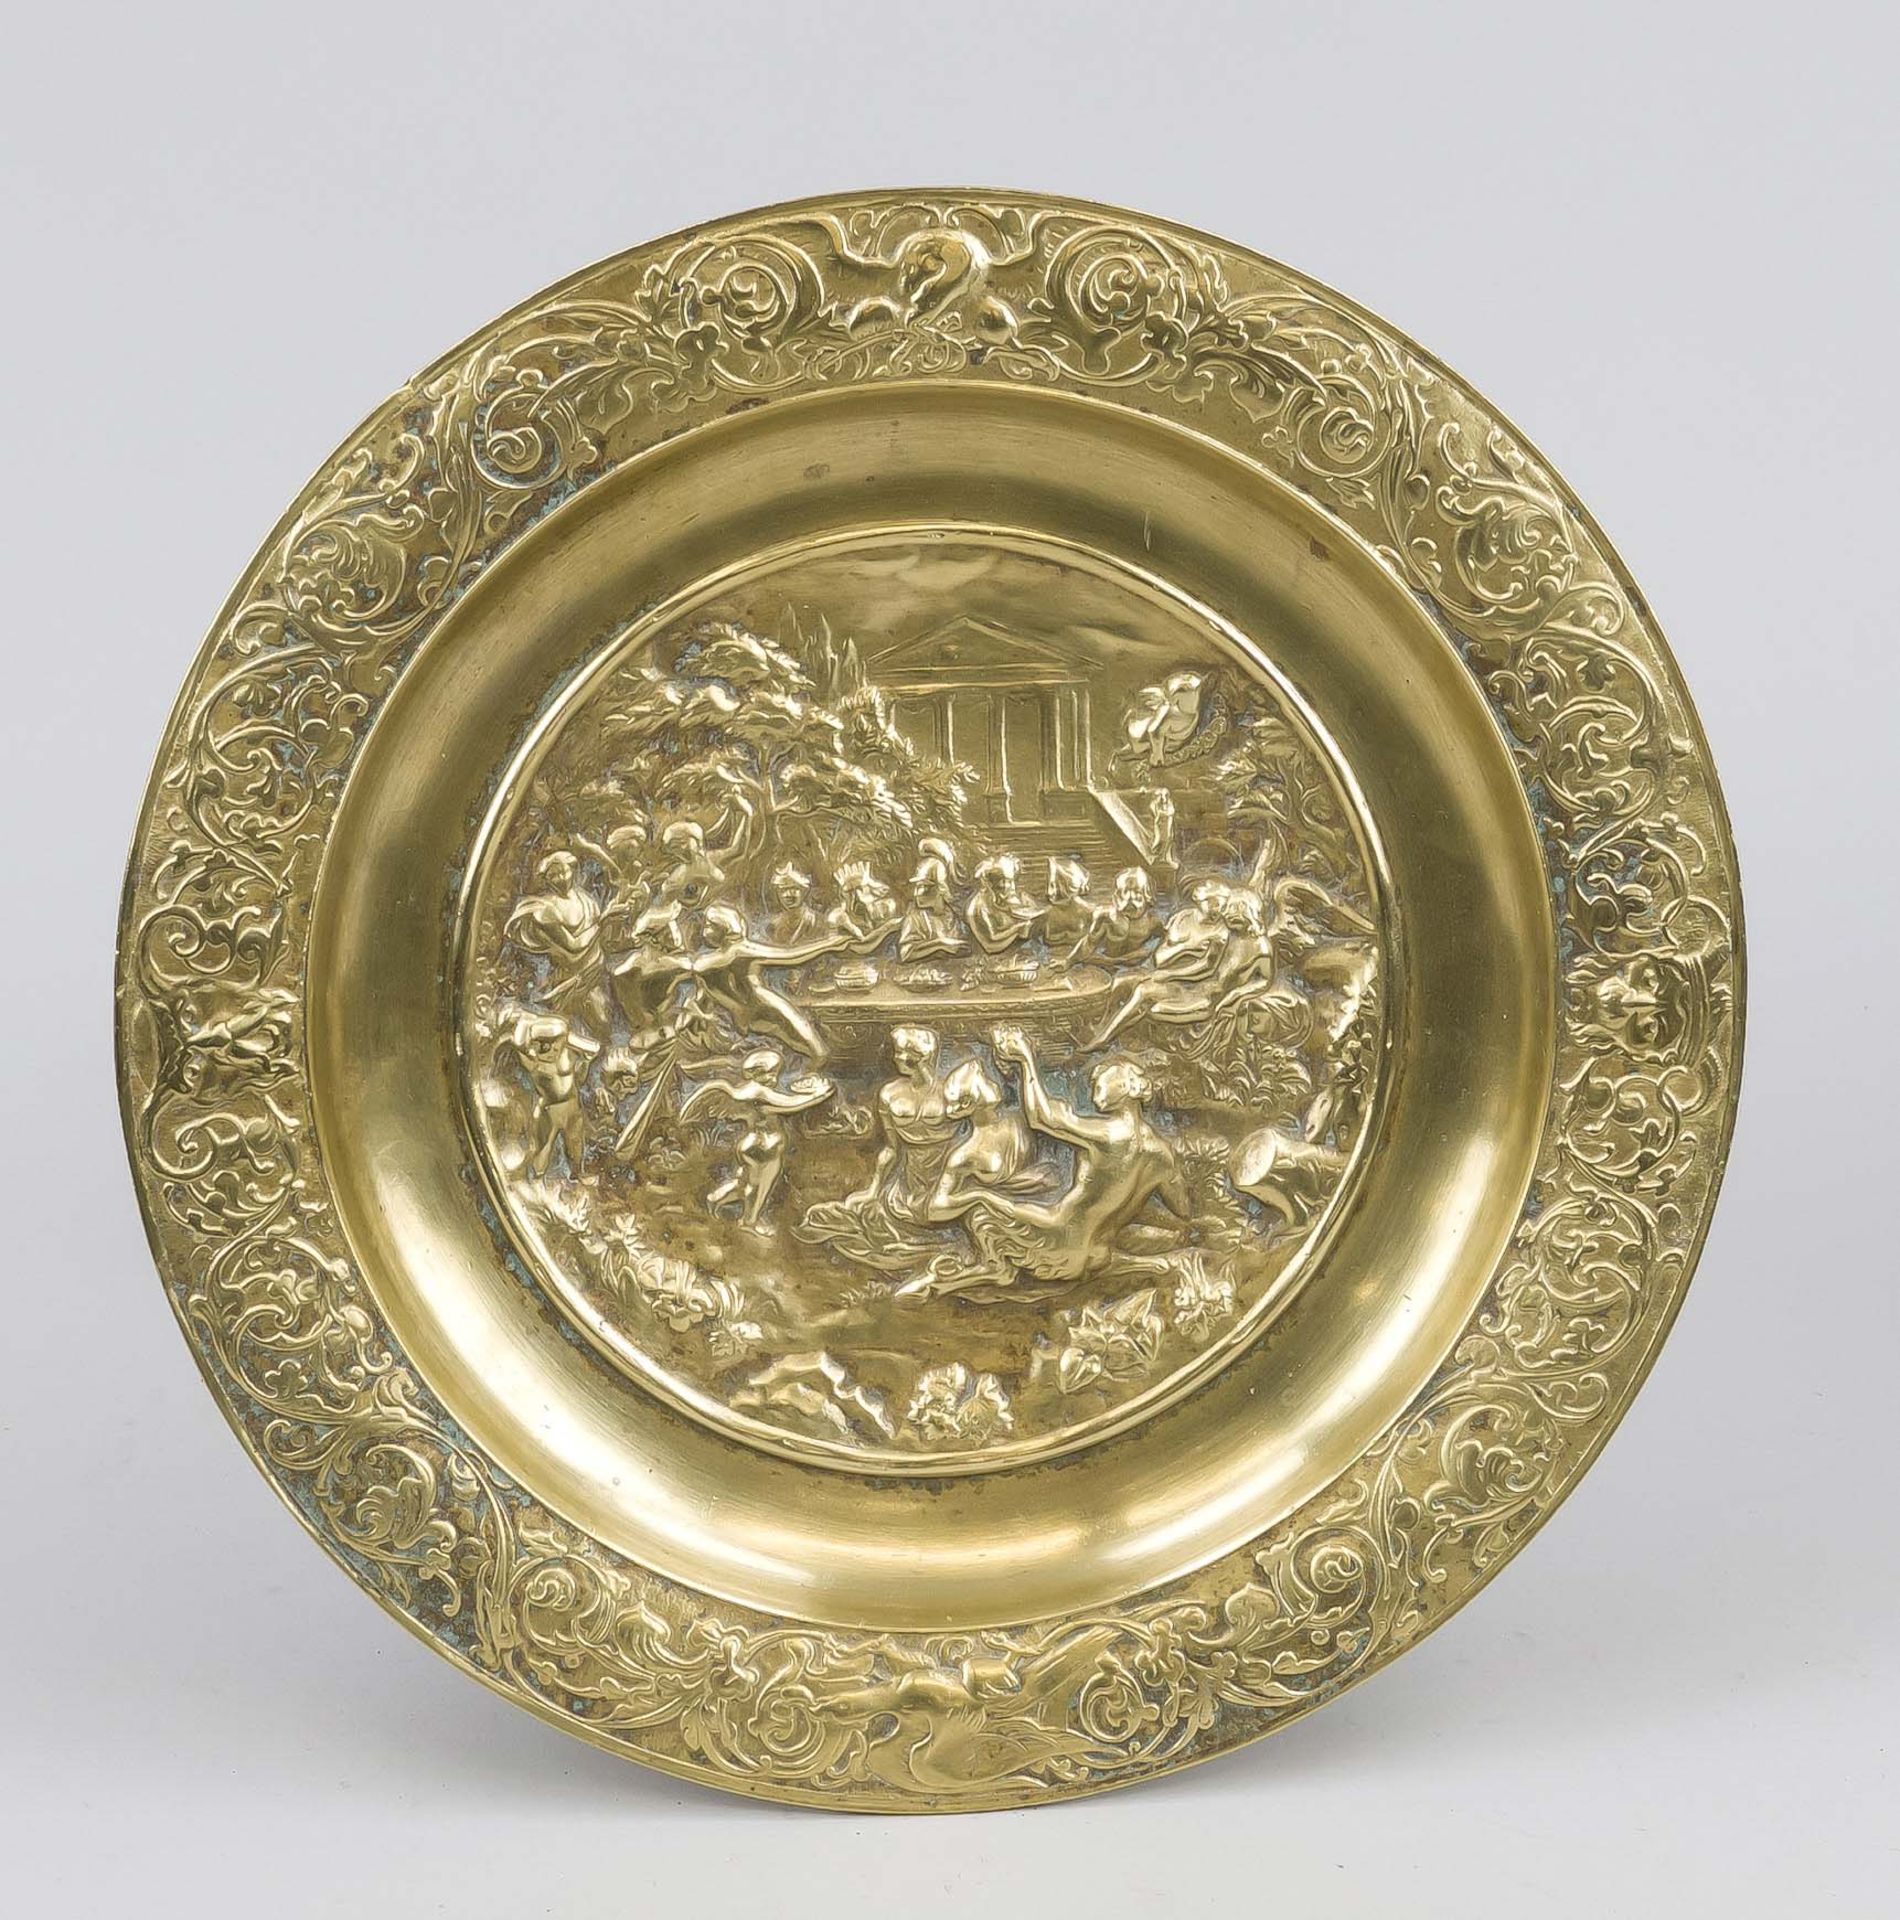 2 brass pieces, 19th century, large centerpiece, the mirror with a relief scene depicting the - Image 2 of 2